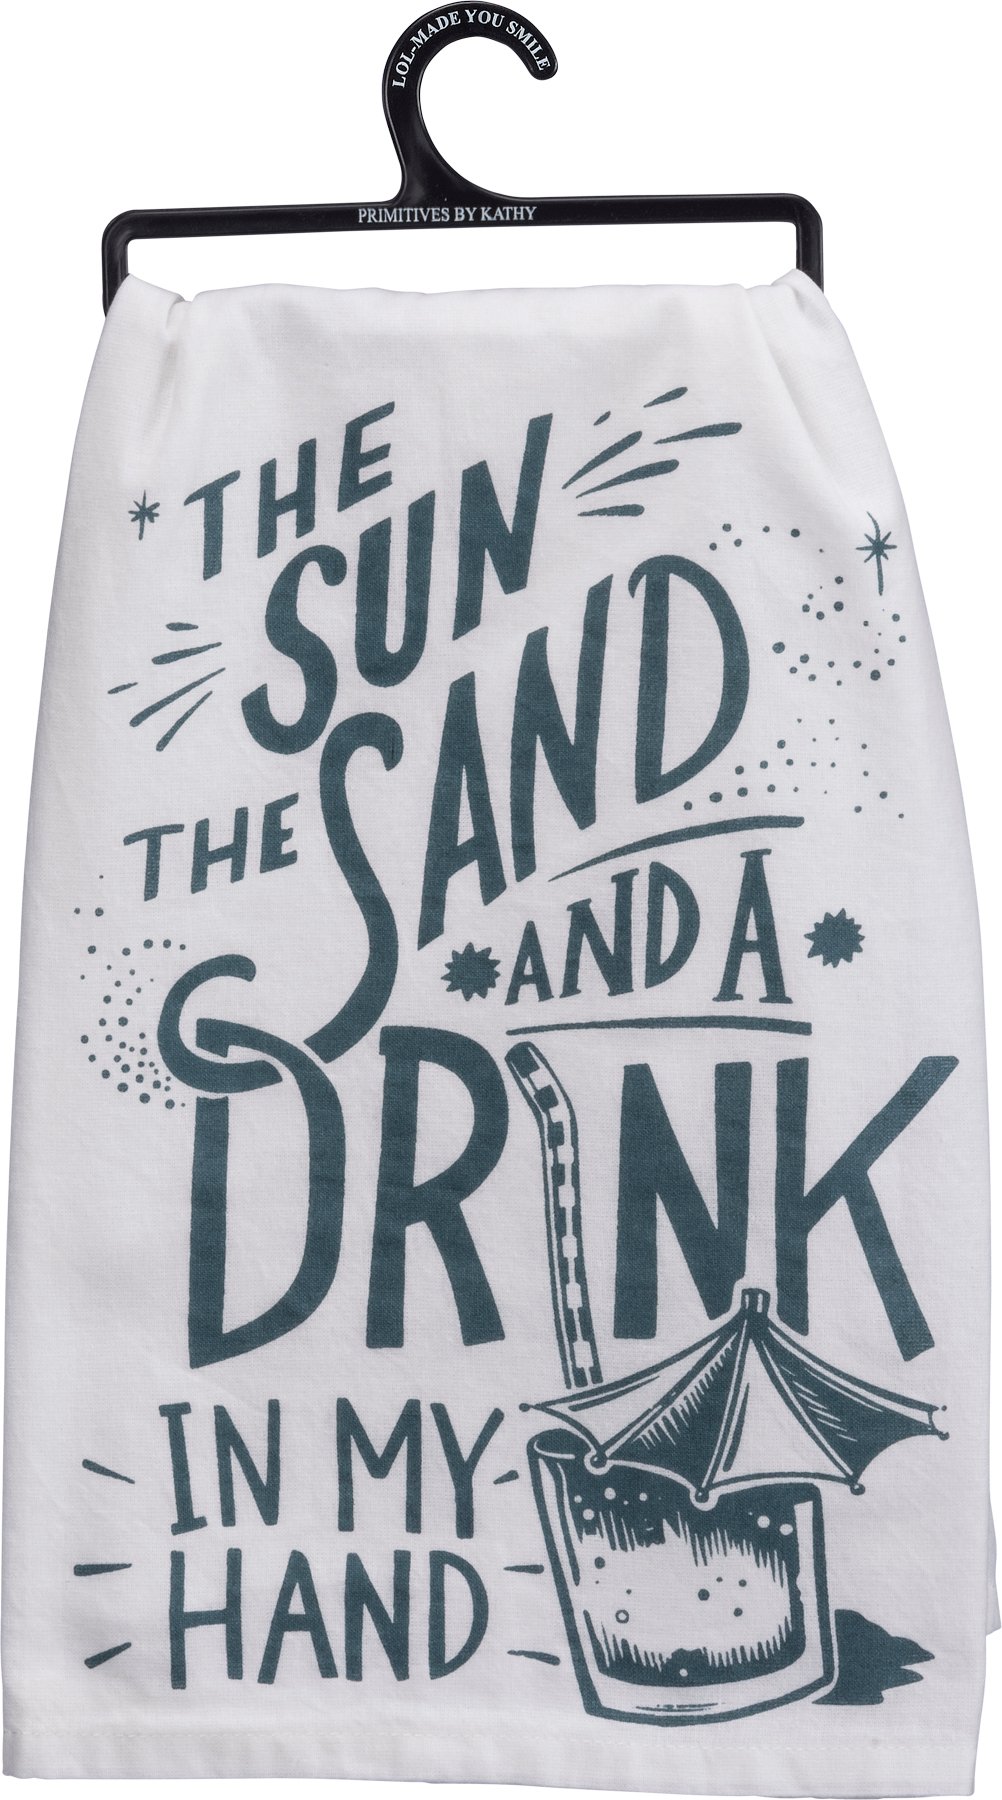 SUN SAND and DRINK IN MY HAND Kay Dee Designs Cotton Flour Sack Towel NEW 